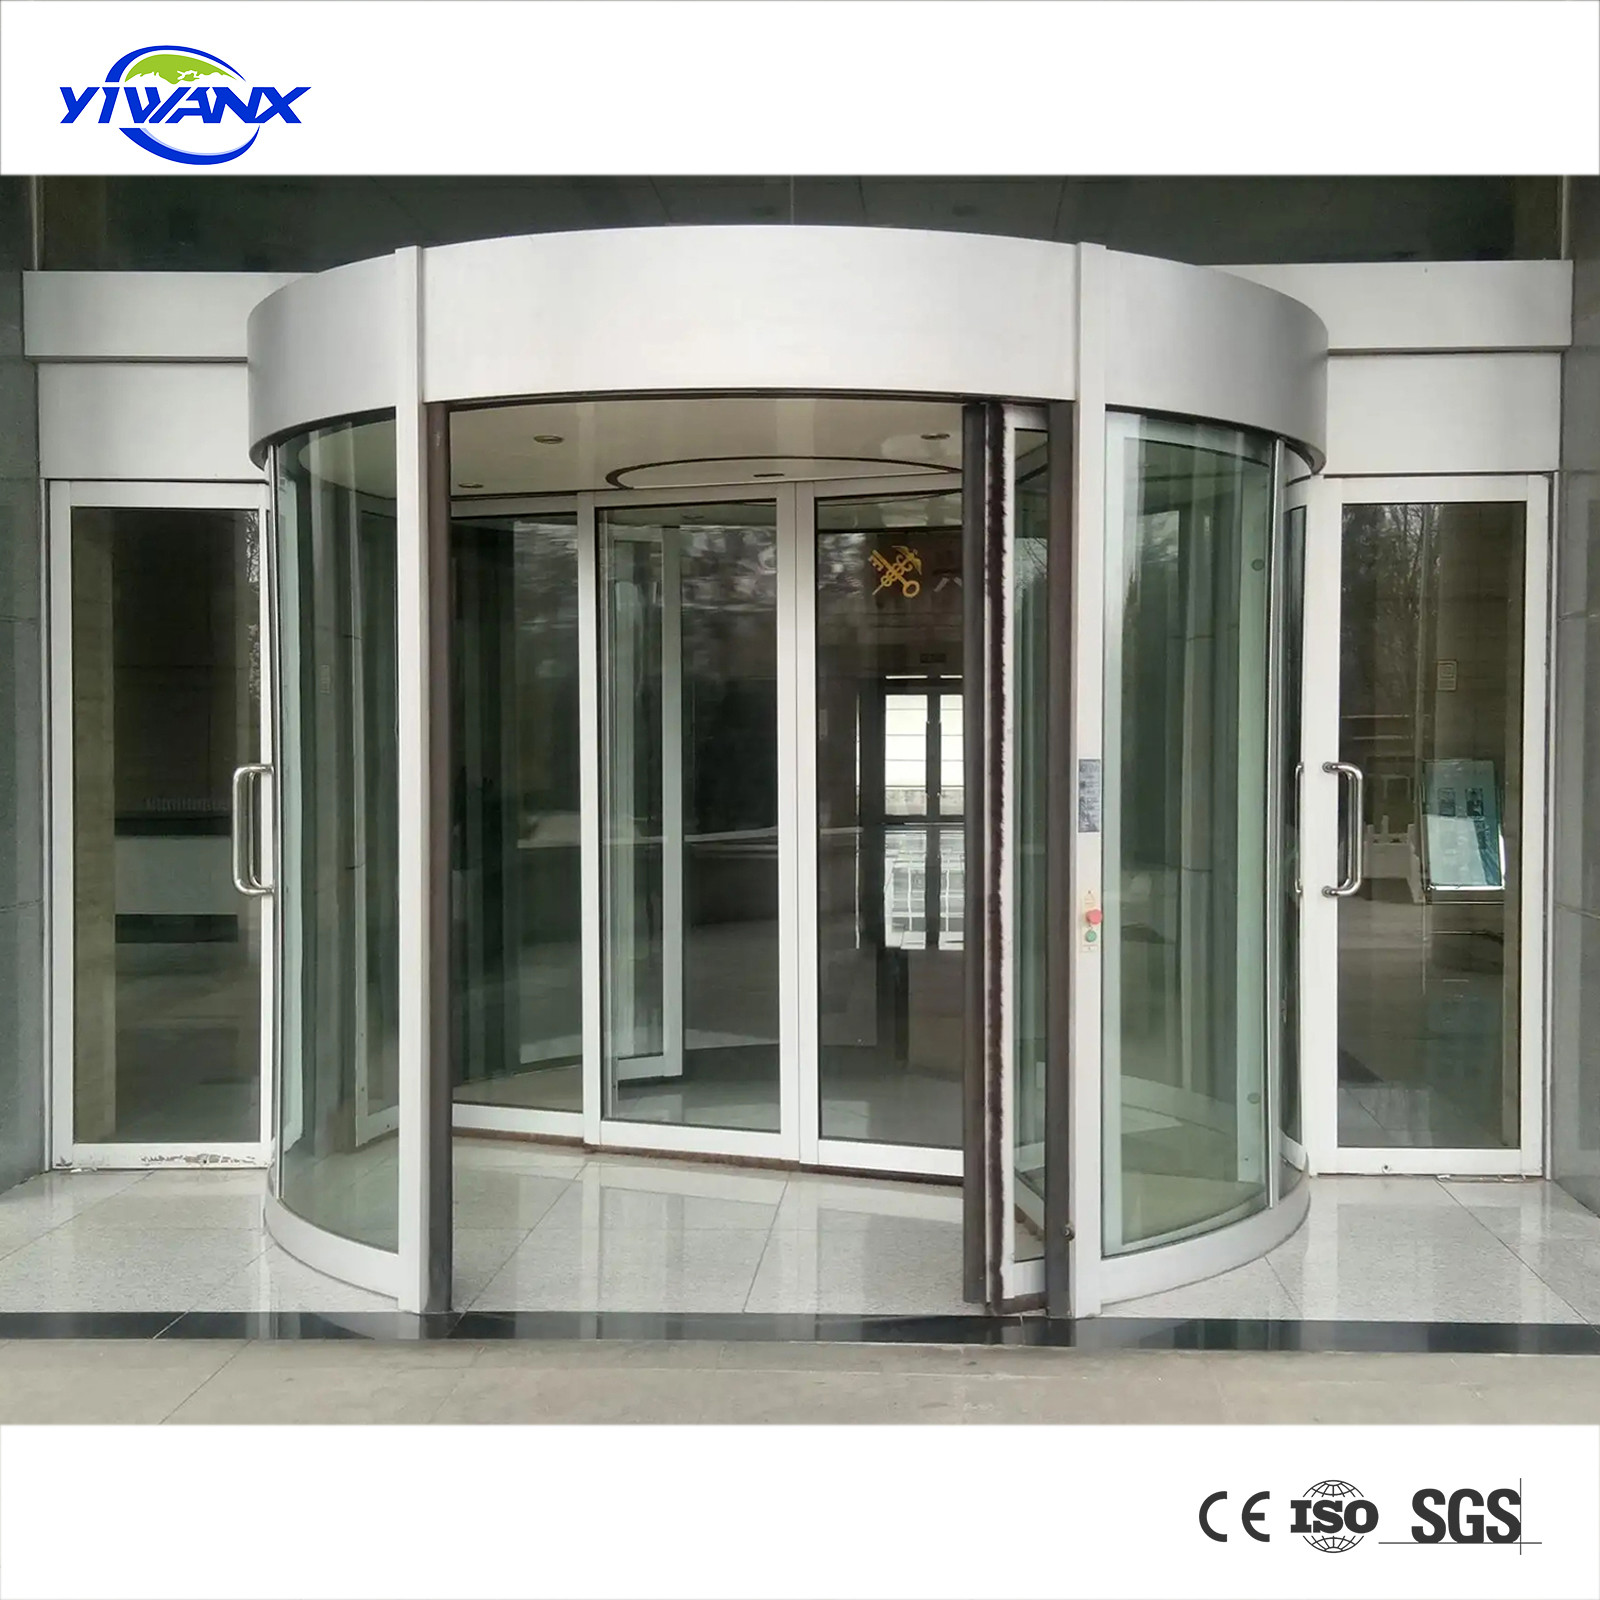 2 Wings Automatic Revolving Door With Digital Control System